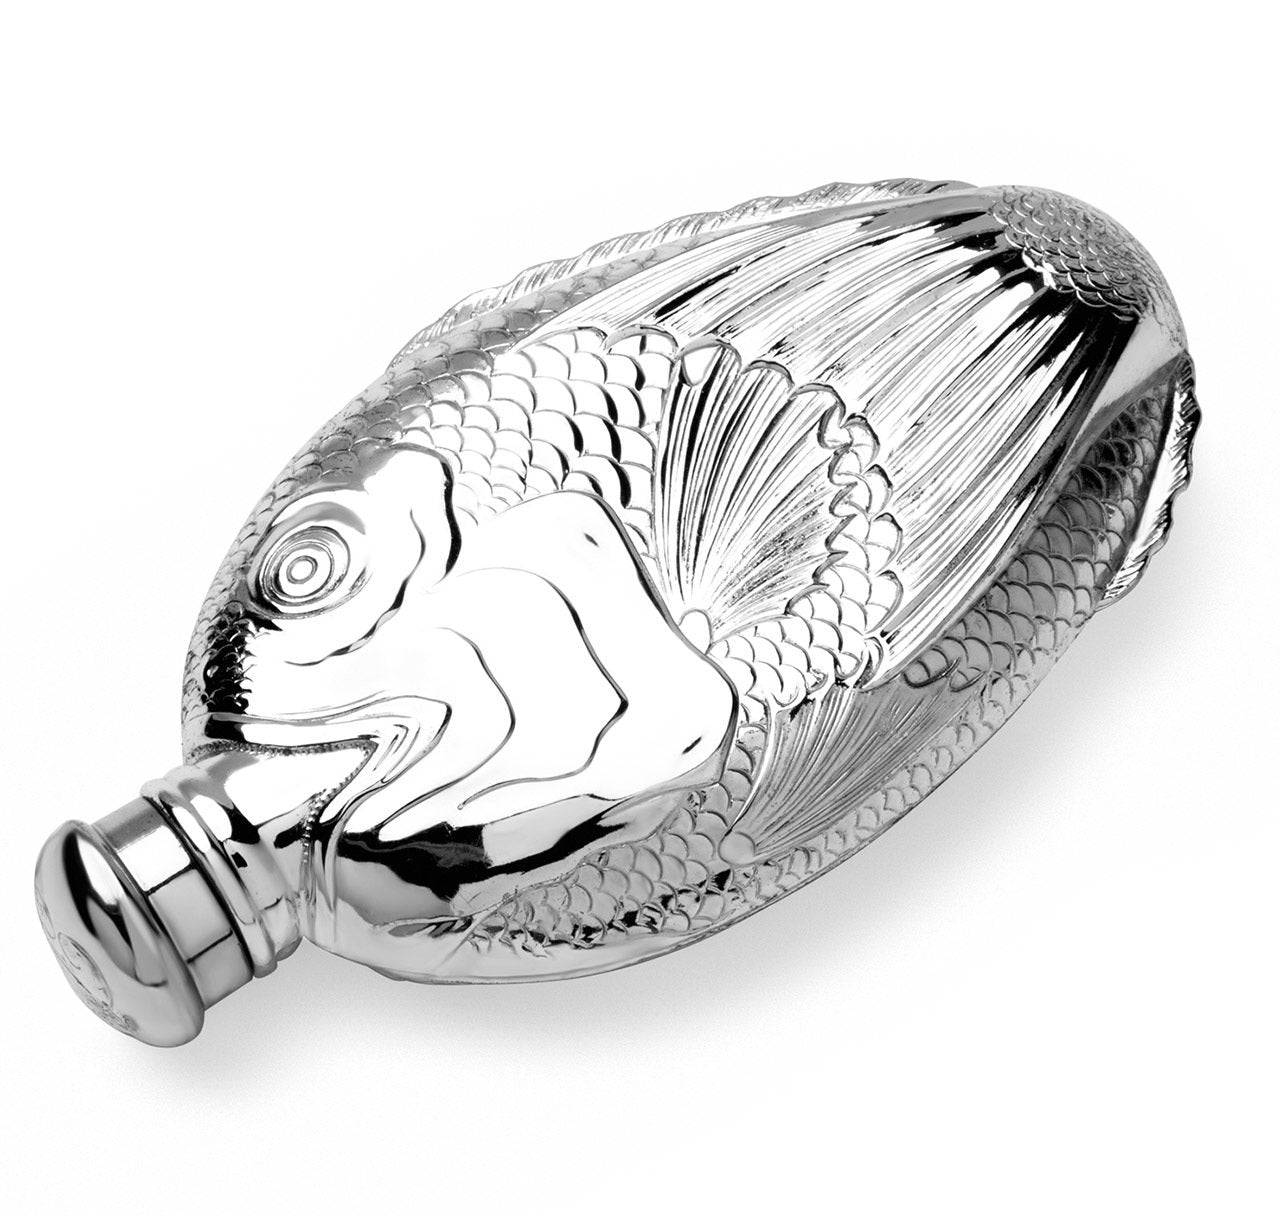 Towle Silver-Plated Fish Hip Flask